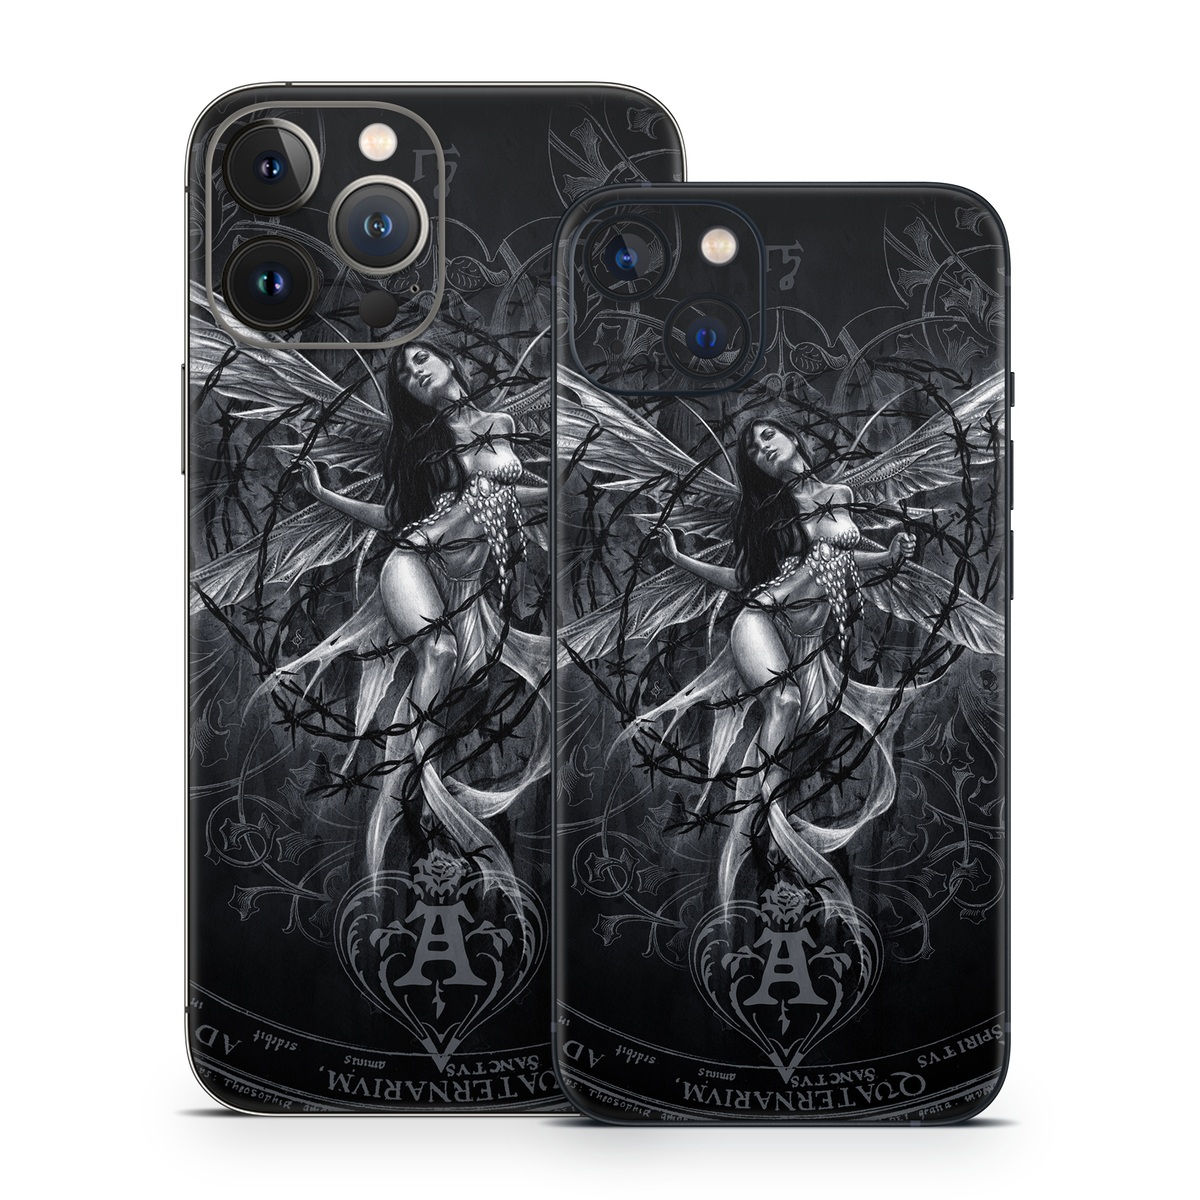 iPhone 13 Series Skin design of Illustration, Graphic design, Darkness, Fictional character, Black-and-white, Pattern, Graphics, Mythical creature, Circle, Wing, with black, white colors